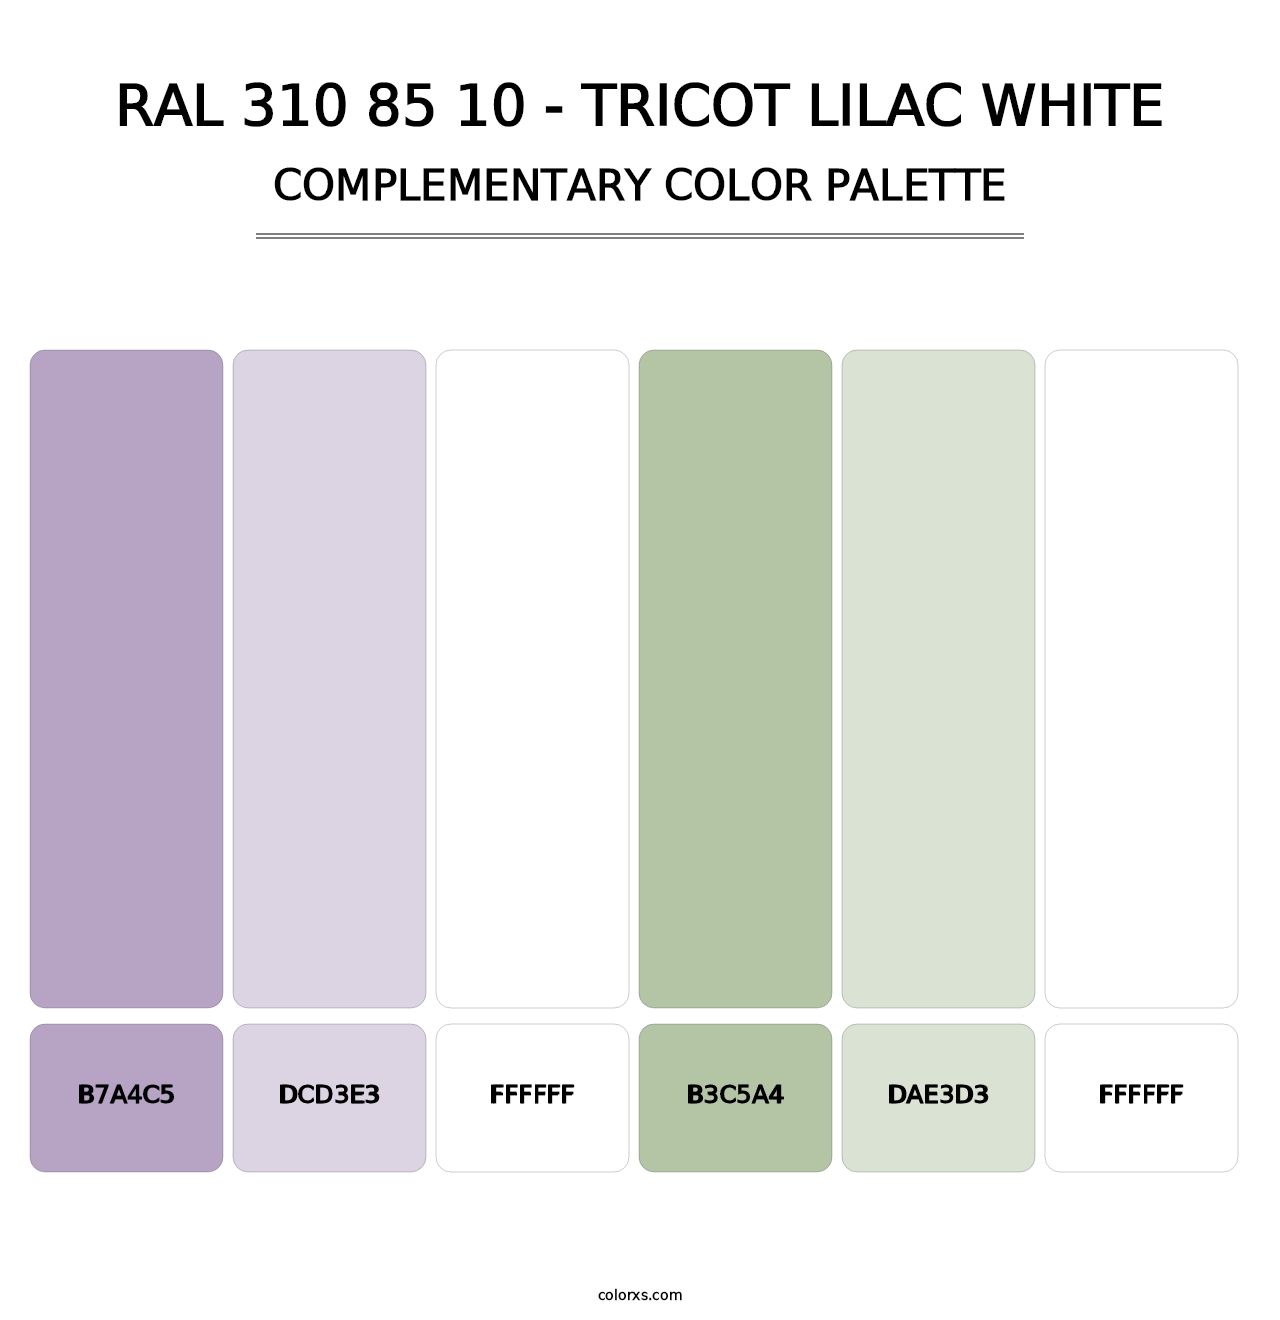 RAL 310 85 10 - Tricot Lilac White - Complementary Color Palette